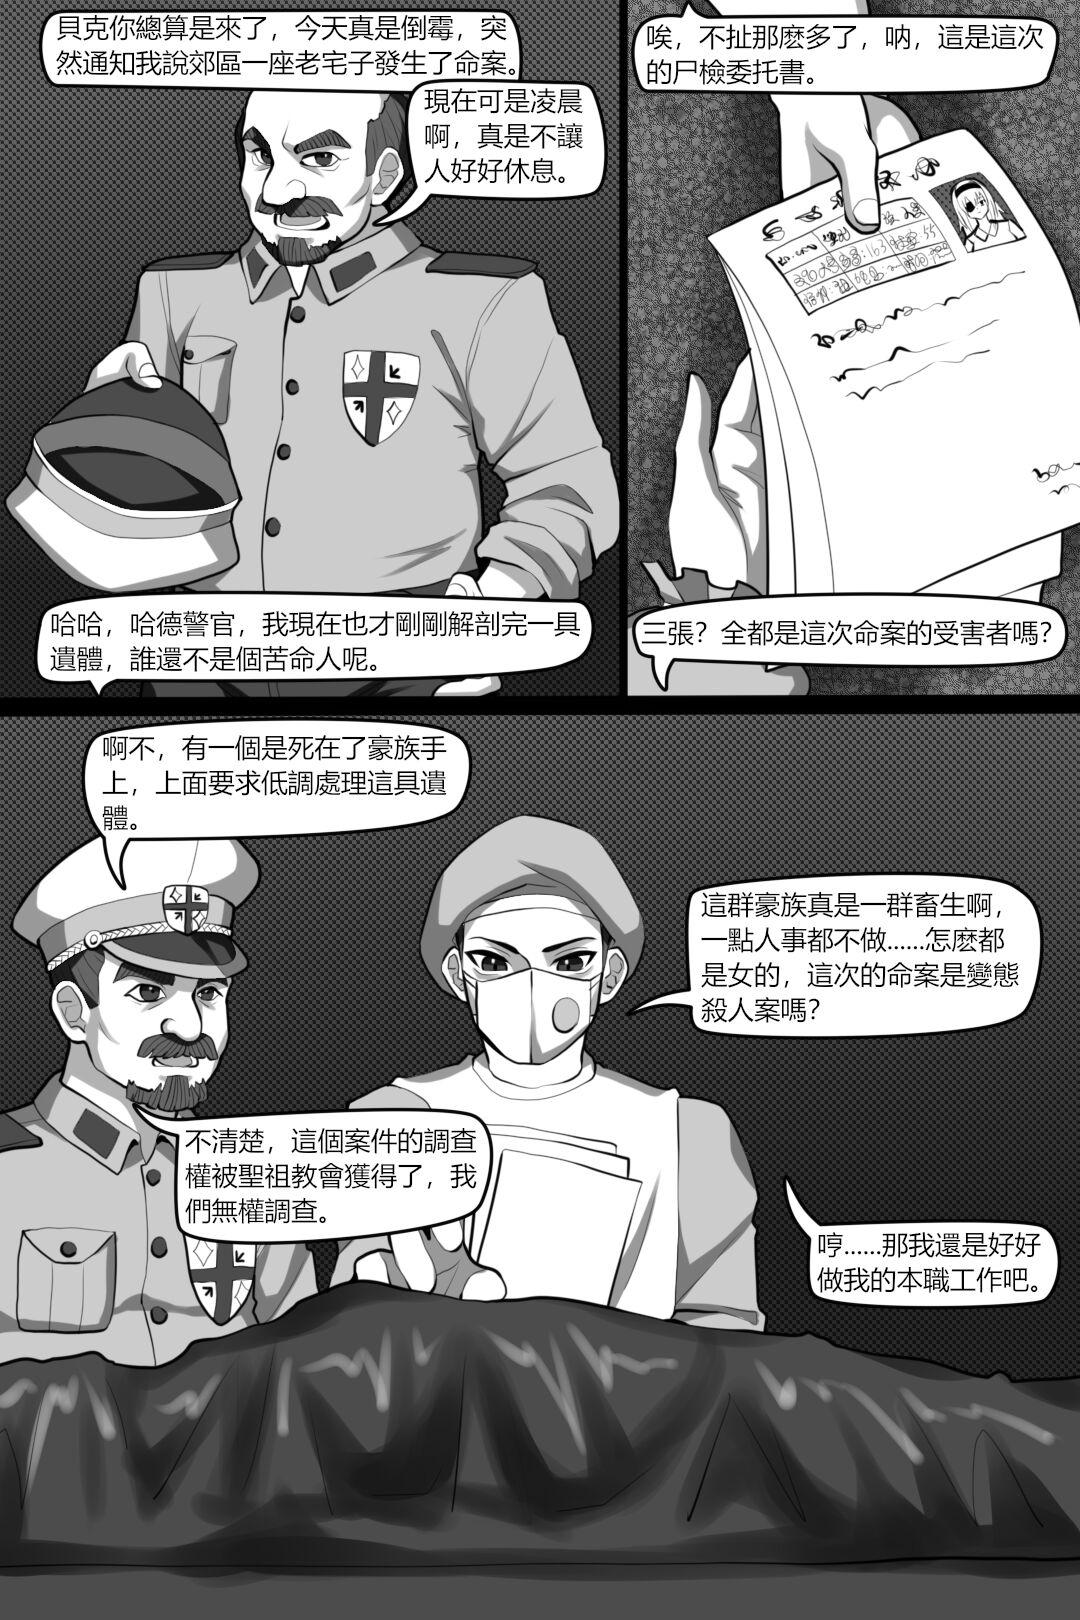 Puta Bin Lian City Stories Chapter 3: Corrupted Forensic - Original Leather - Page 8